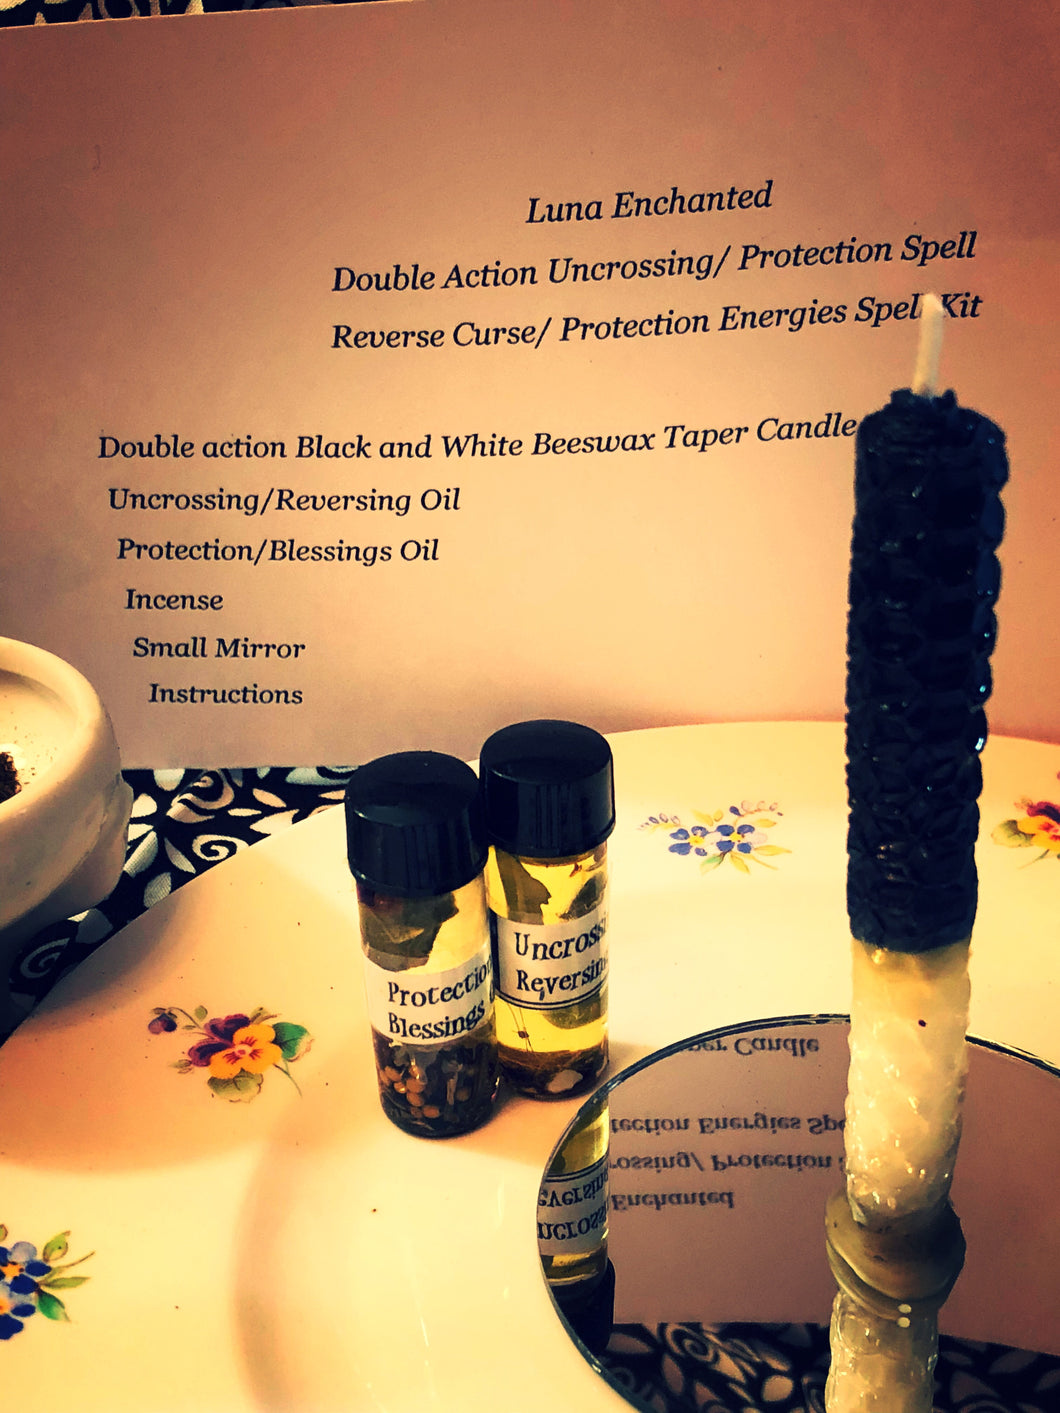 Double Action Uncrossing / Protection  Spell Kit     Reverse Curse